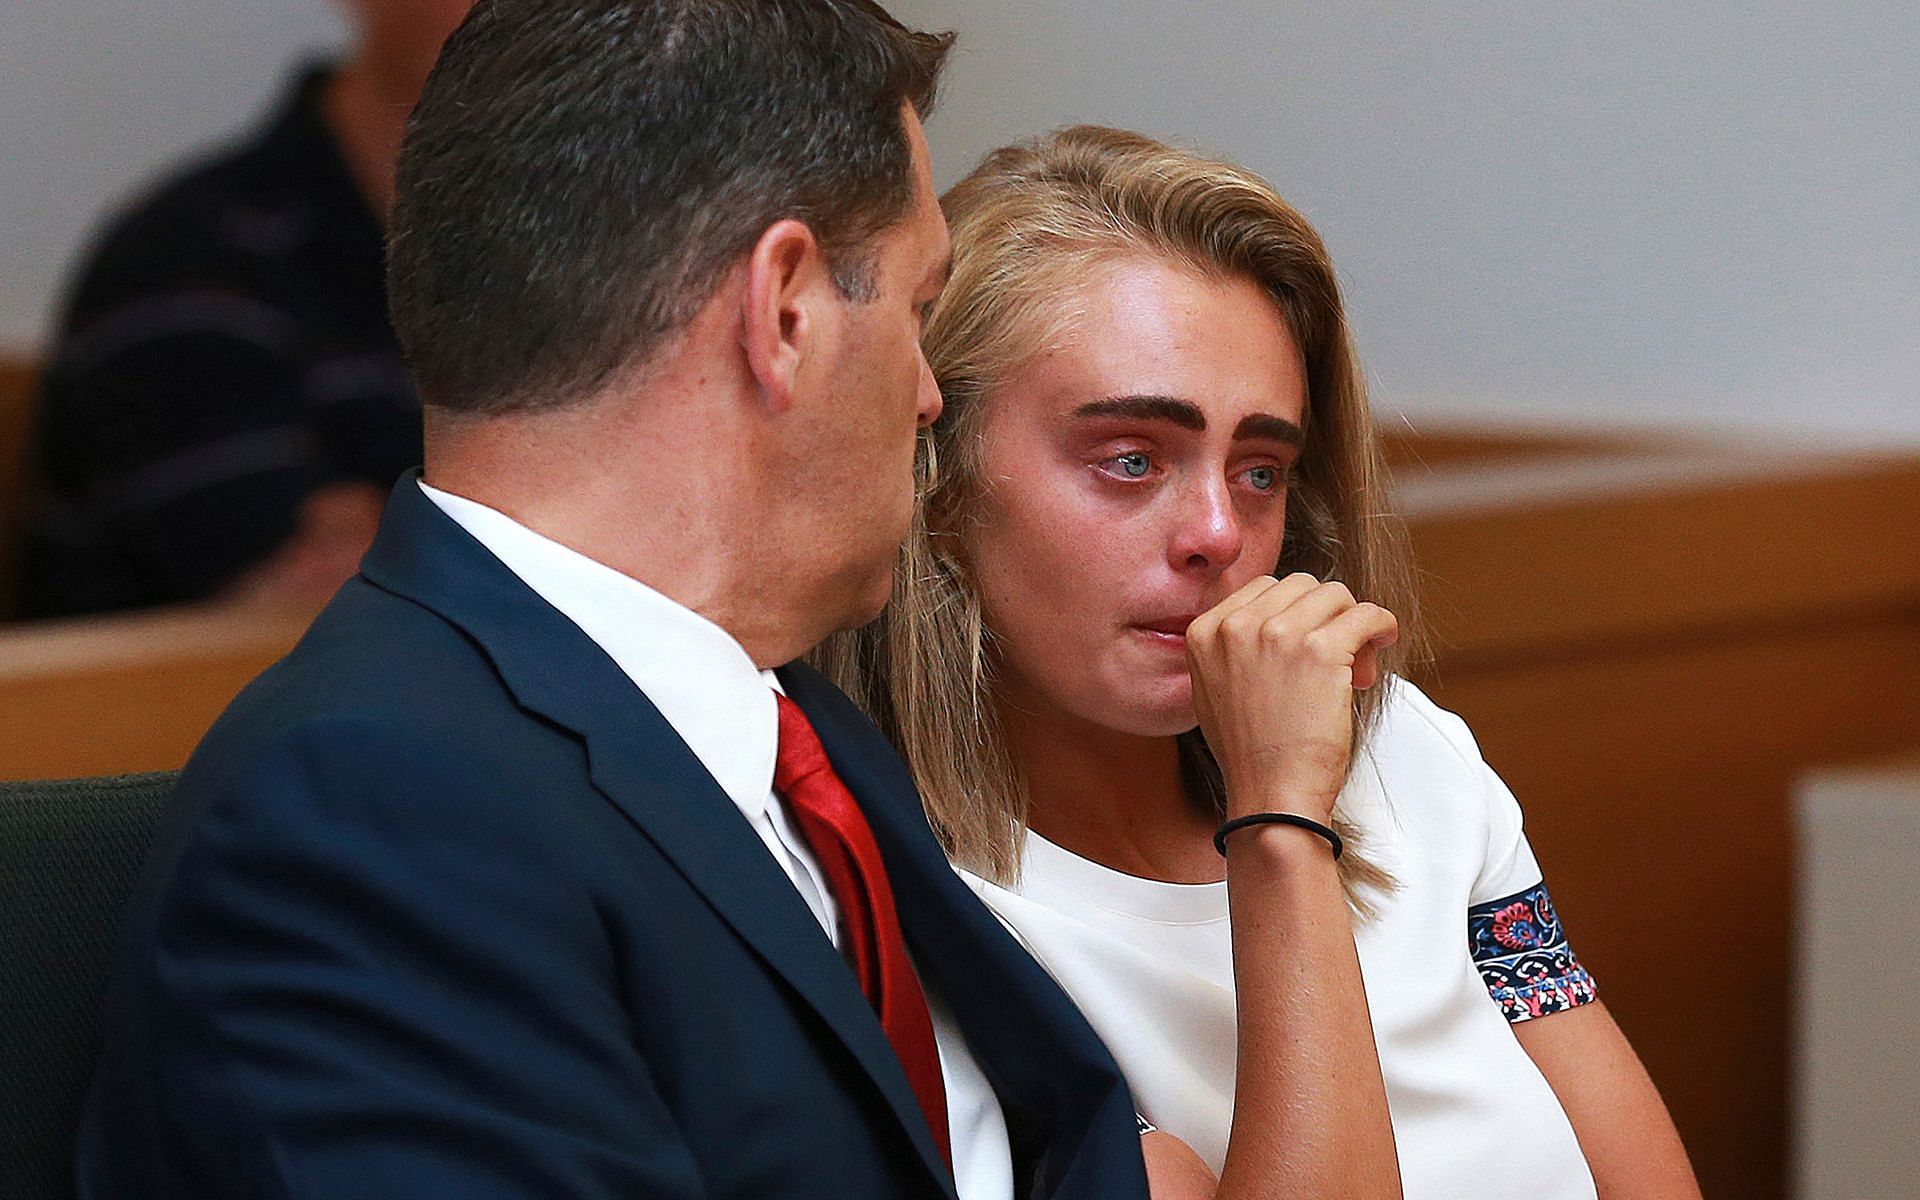 Michelle Carter was convicted in the controversial 2017 texting-suicide scandal (Image via Reddit)